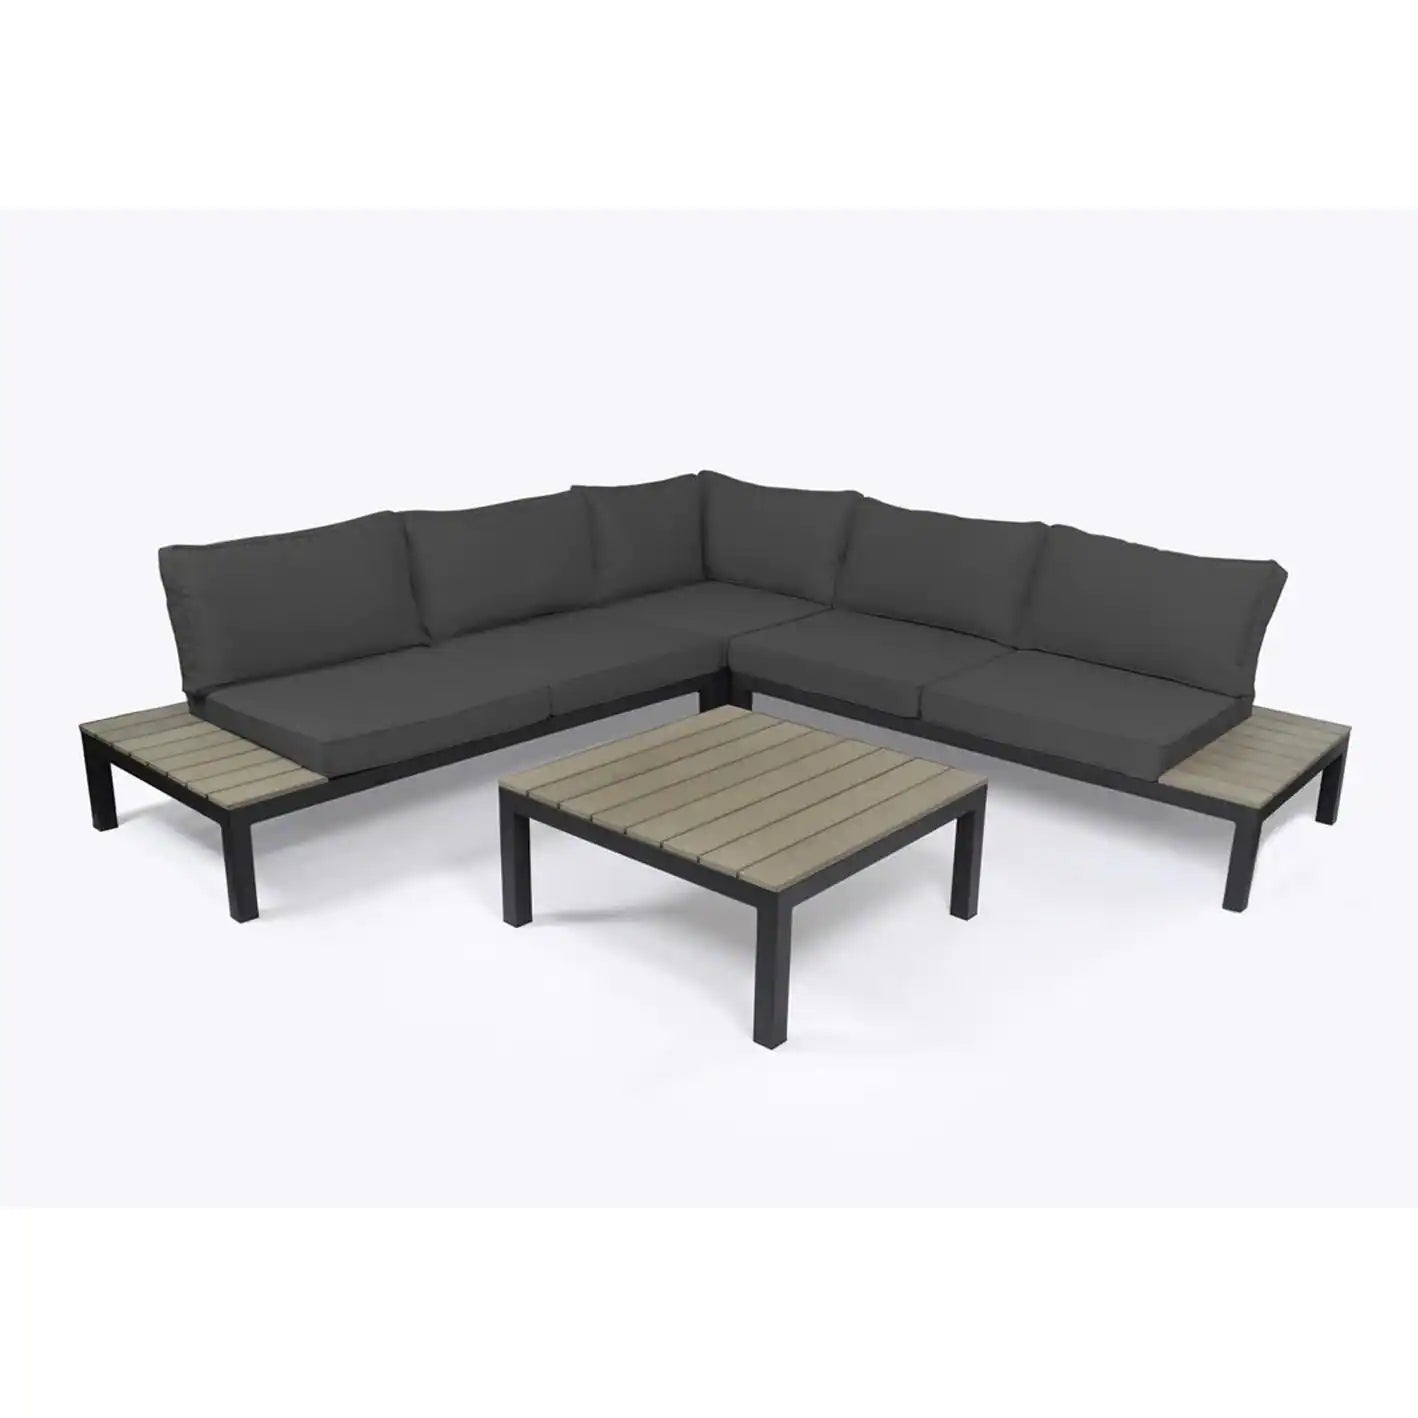 Tortuga Outdoor Lakeview 4 Piece Outdoor Patio Sectional Set